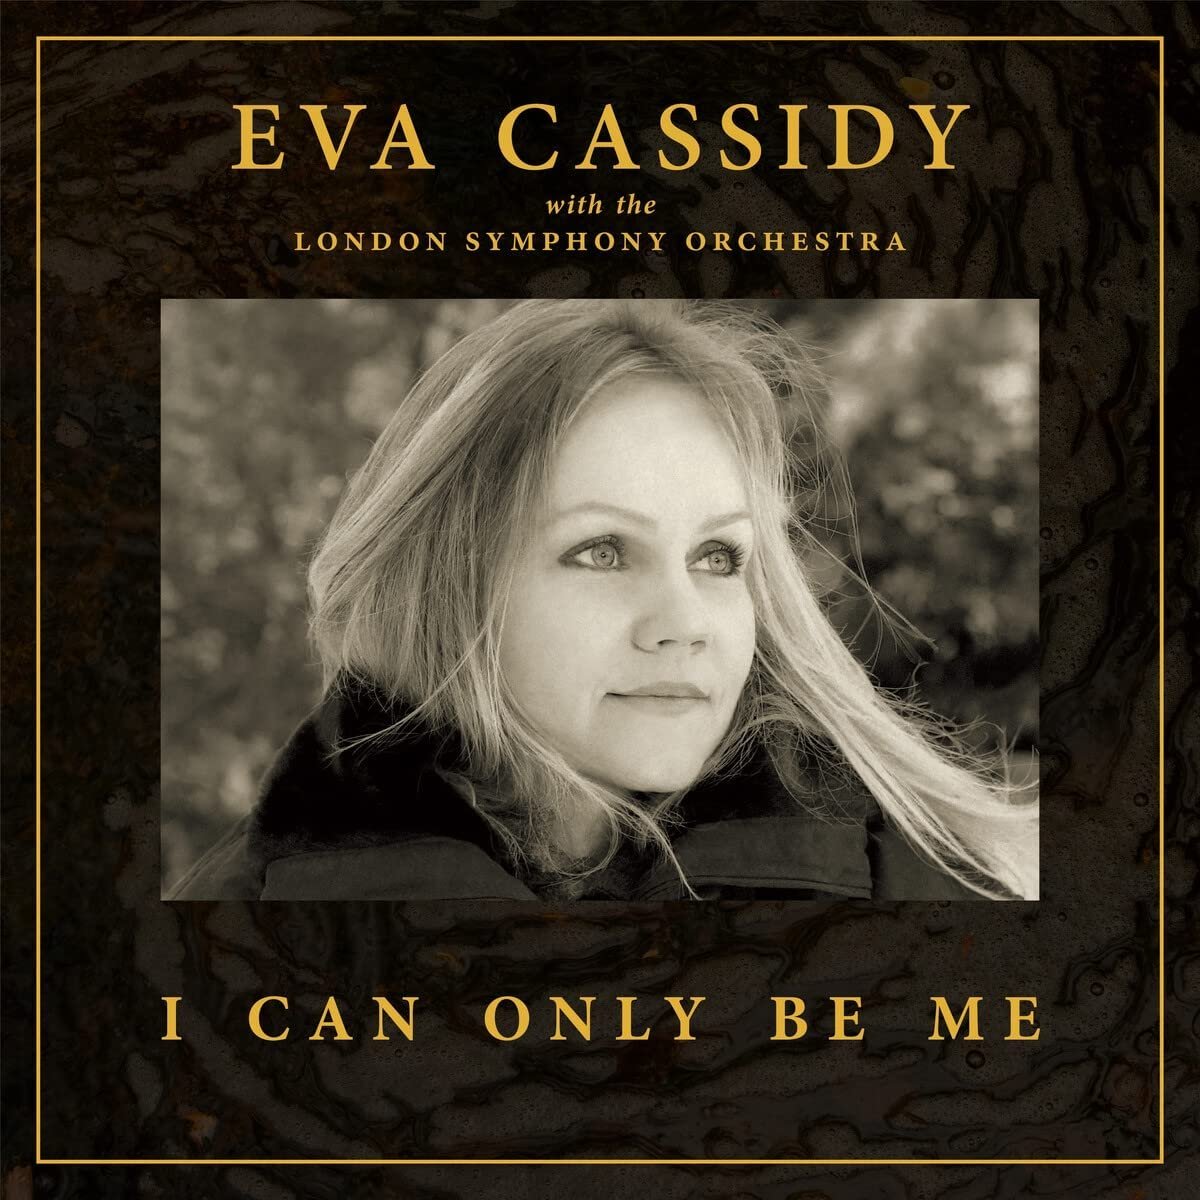 CD Shop - CASSIDY, EVA  LONDON SYMPHONY ORCHESTRA & CHRISTOPHER WILLIS I CAN ONLY BE ME (DELUXE HARDBACK EDITION)